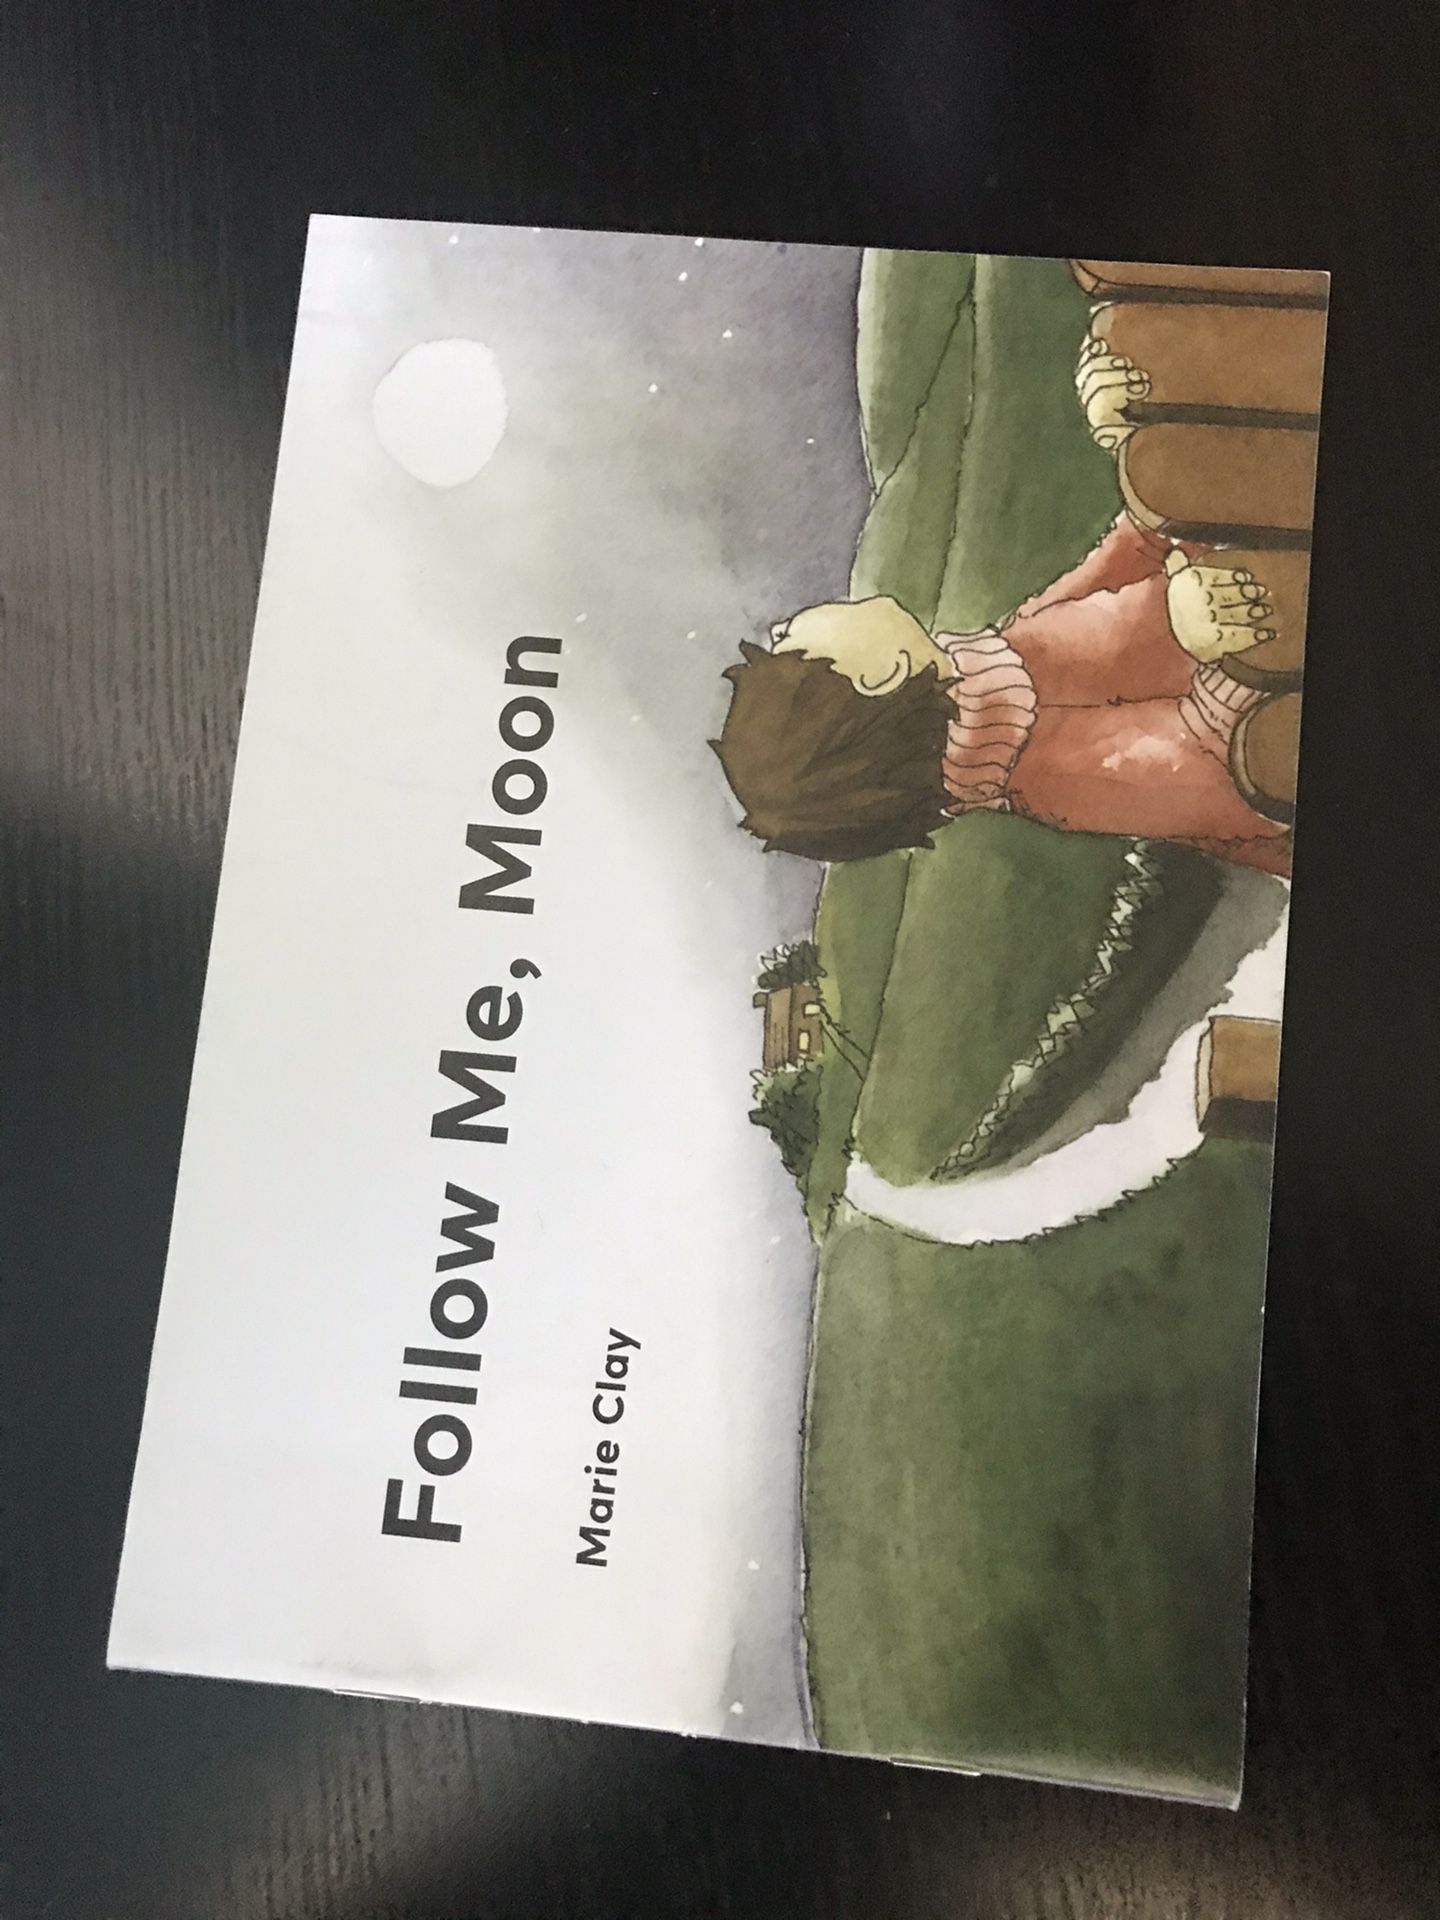 Follow me moon by Marie clay